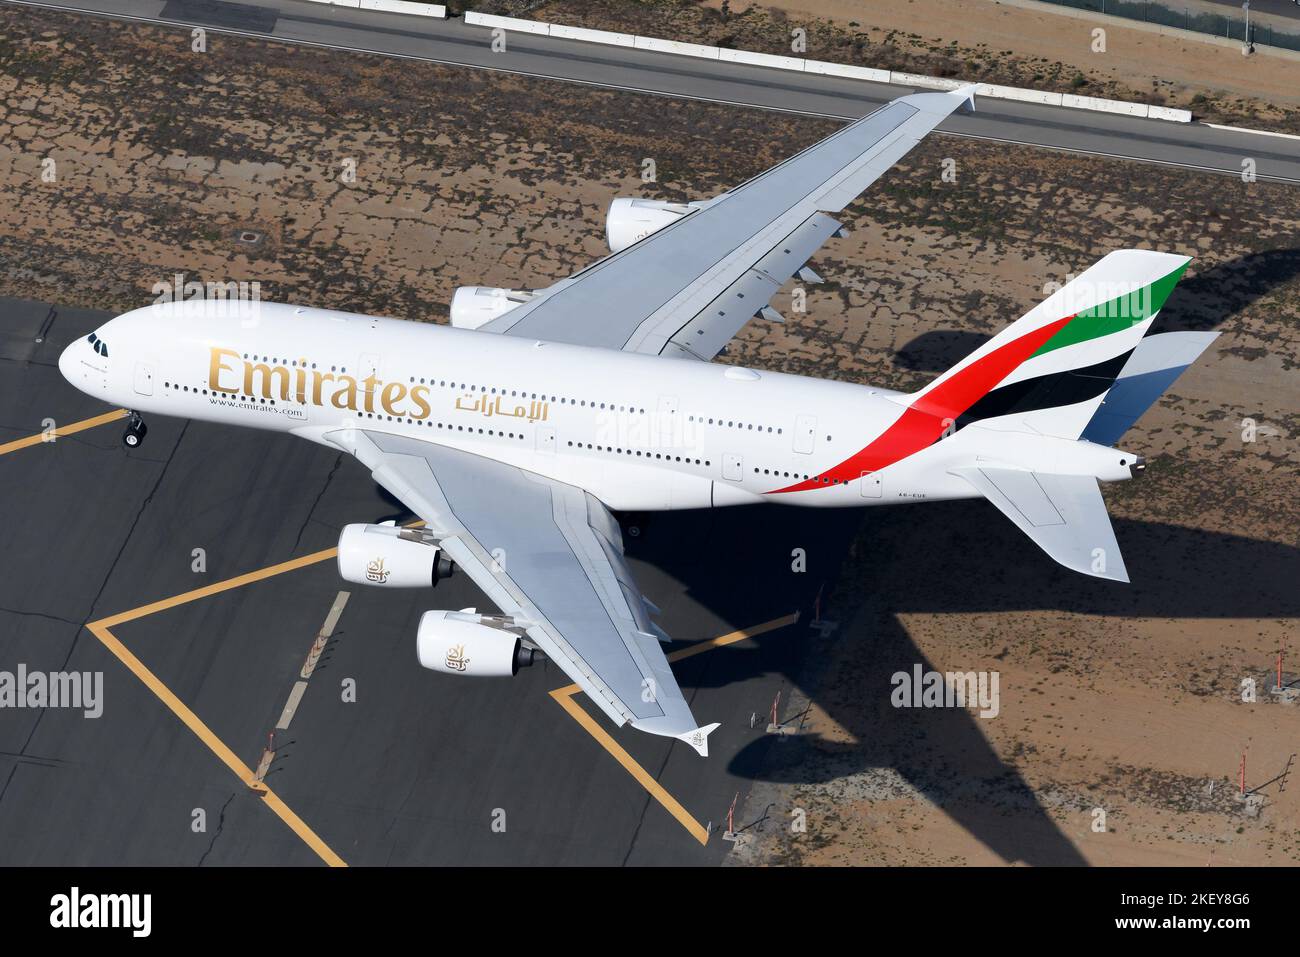 Emirates Airline Airbus A380 aircraft landing, seen from above. Emirates Airlines A380-800 airplane flying. Stock Photo